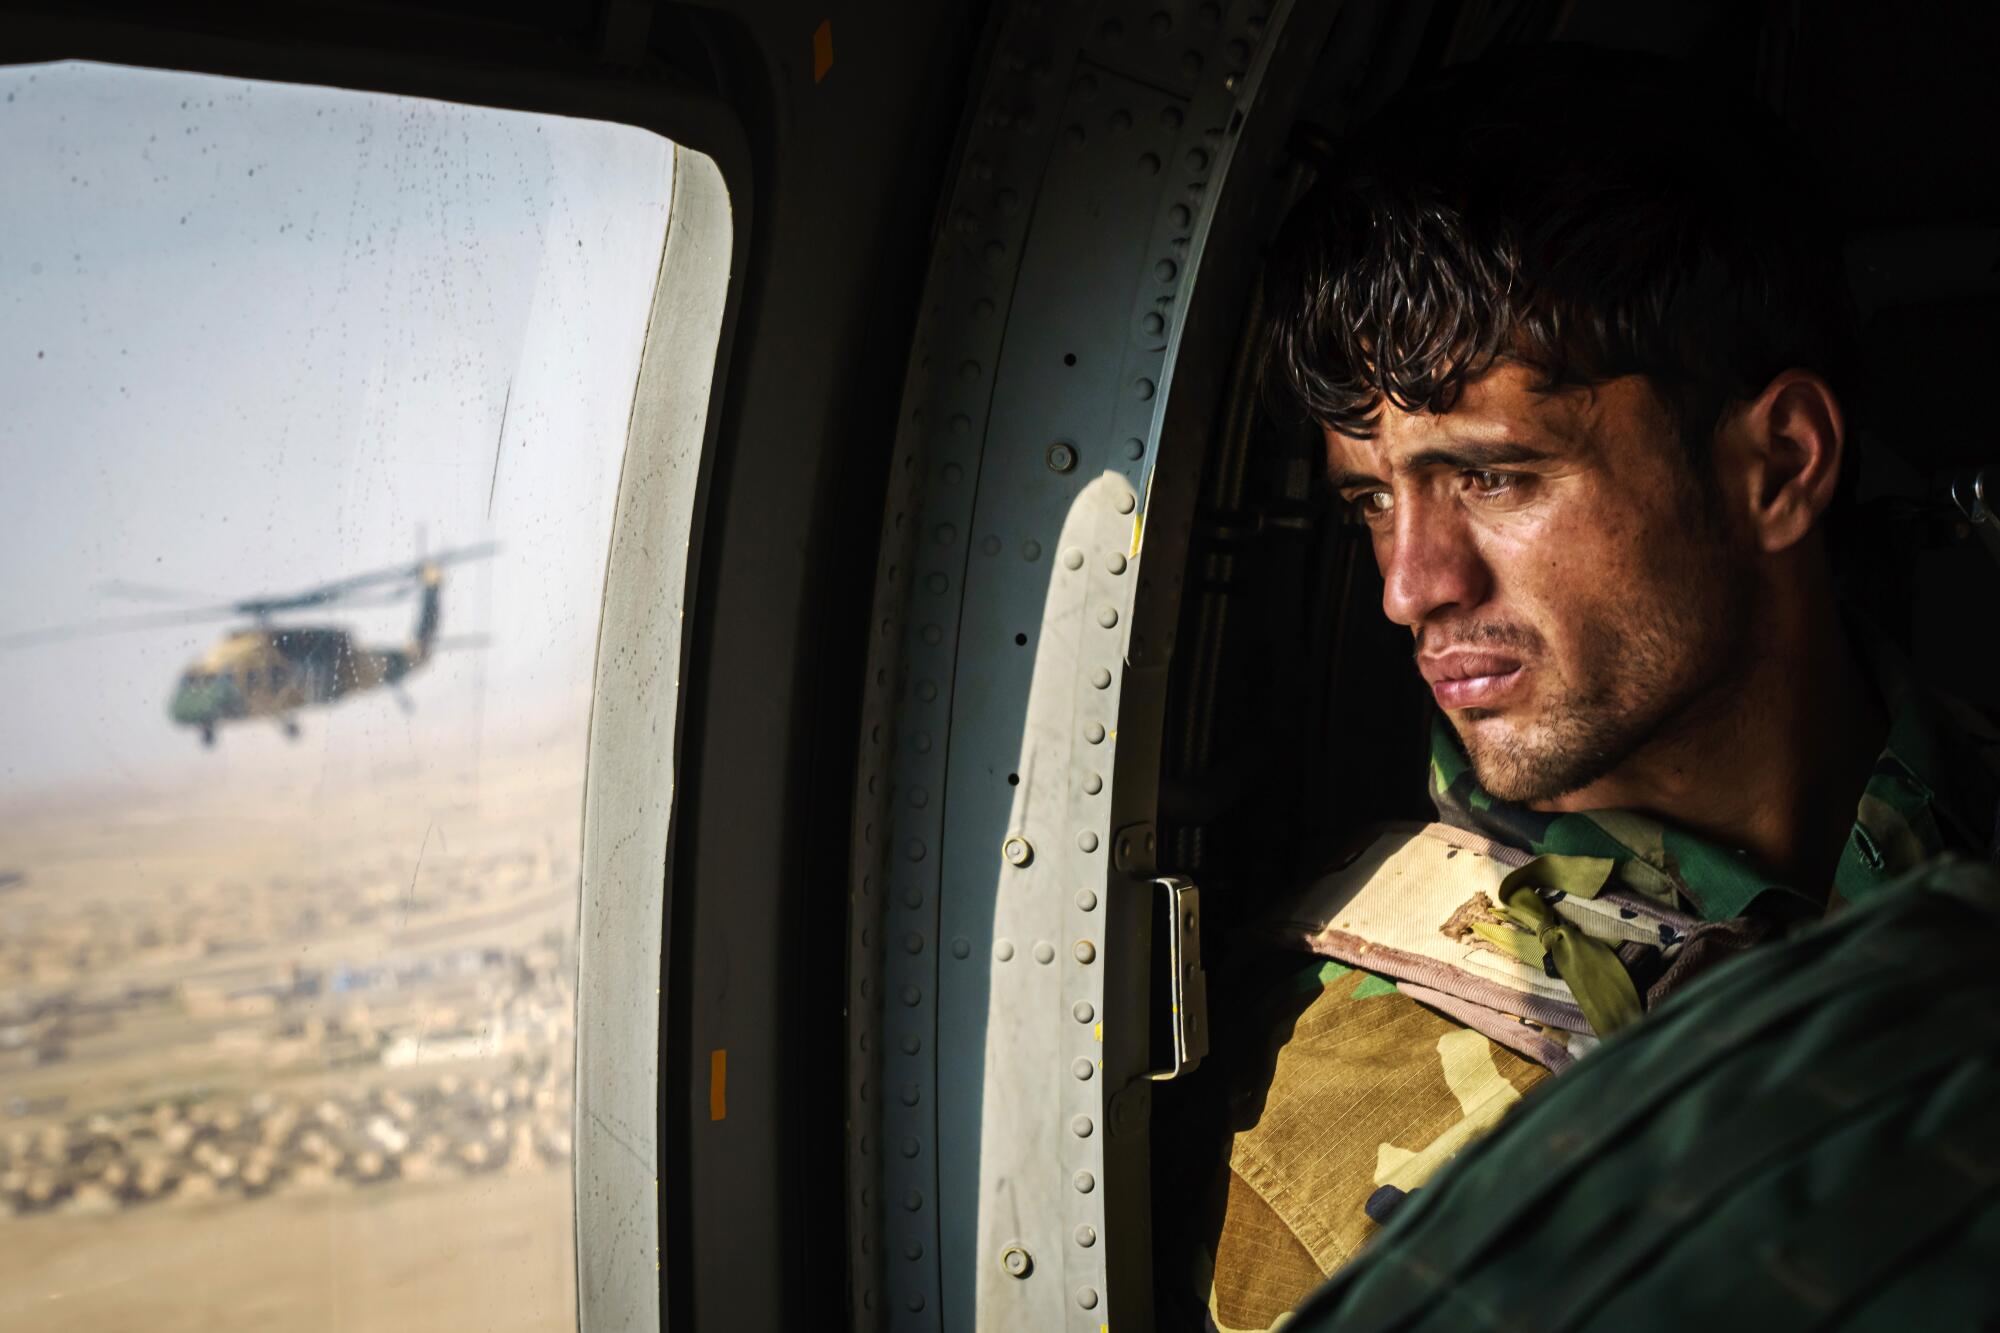 A weary-looking soldier looks out the window of a helicopter